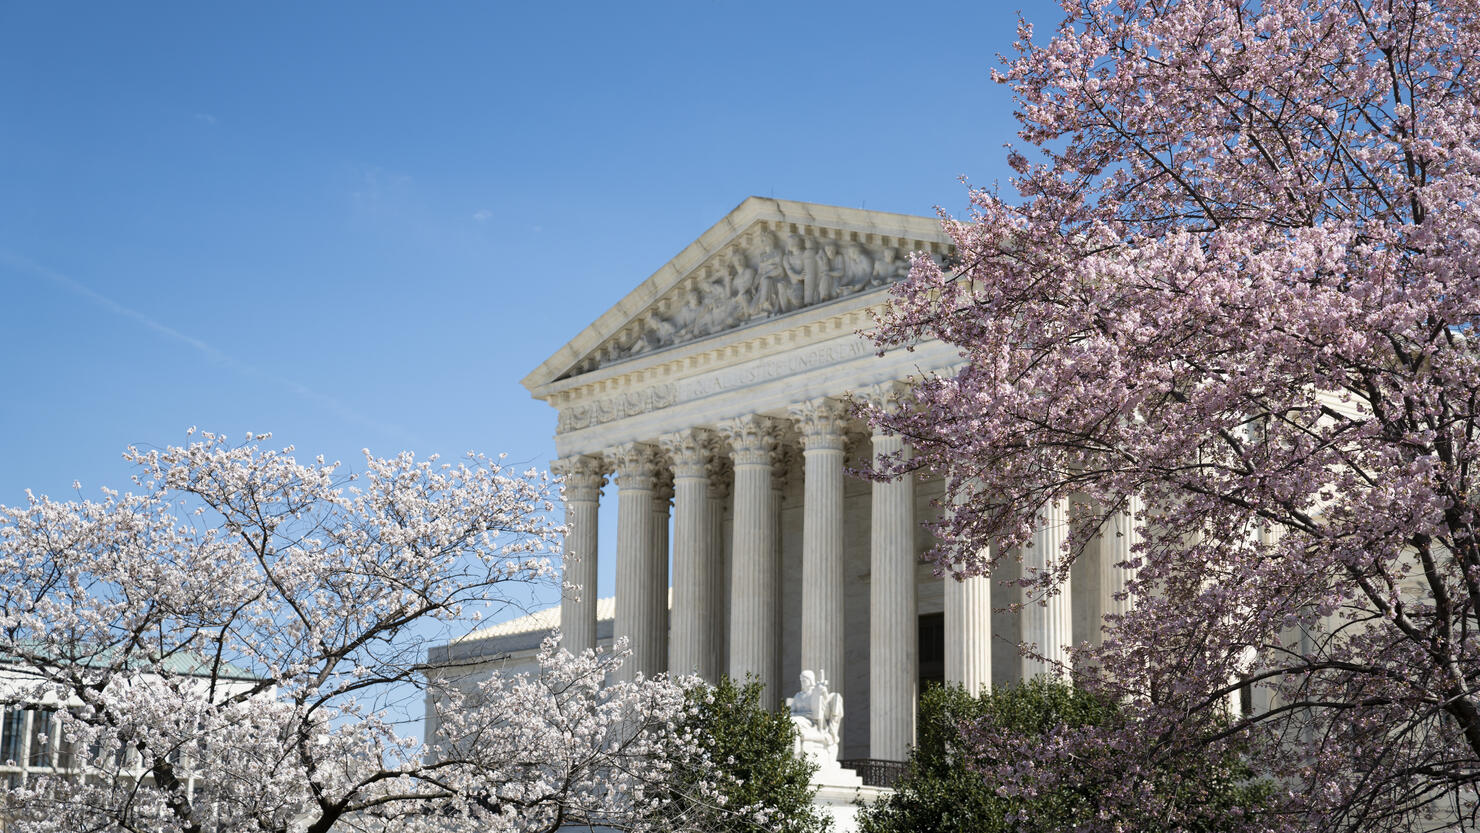 United States Supreme Court with Cherry Blossoms